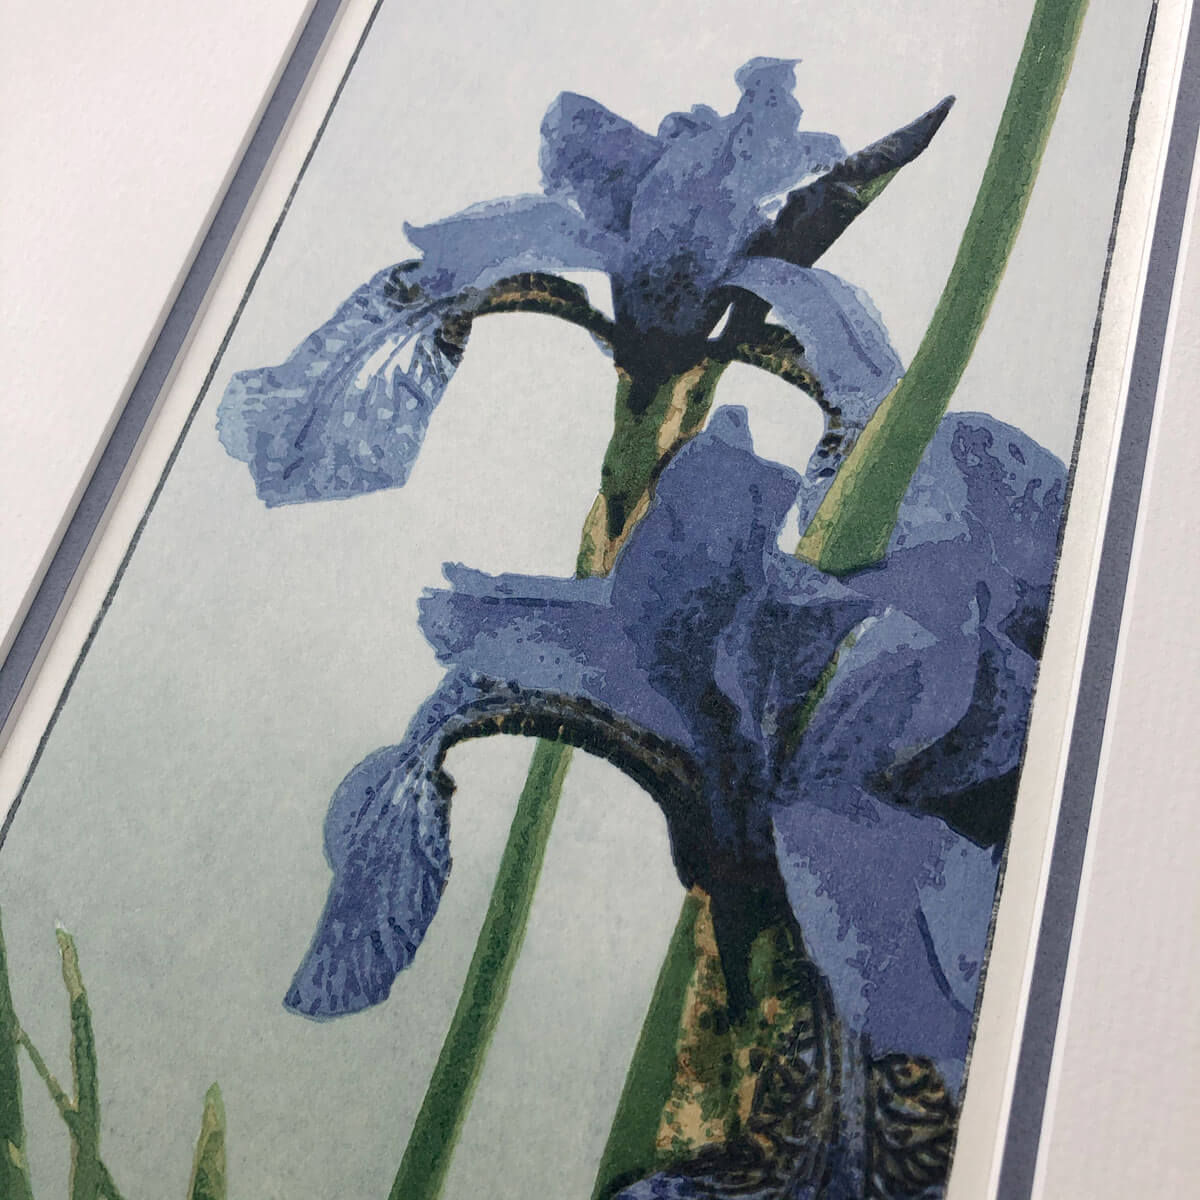 handmade limited edition woodblock print of purple iris flowers and green foliage against a graded pale blue green background